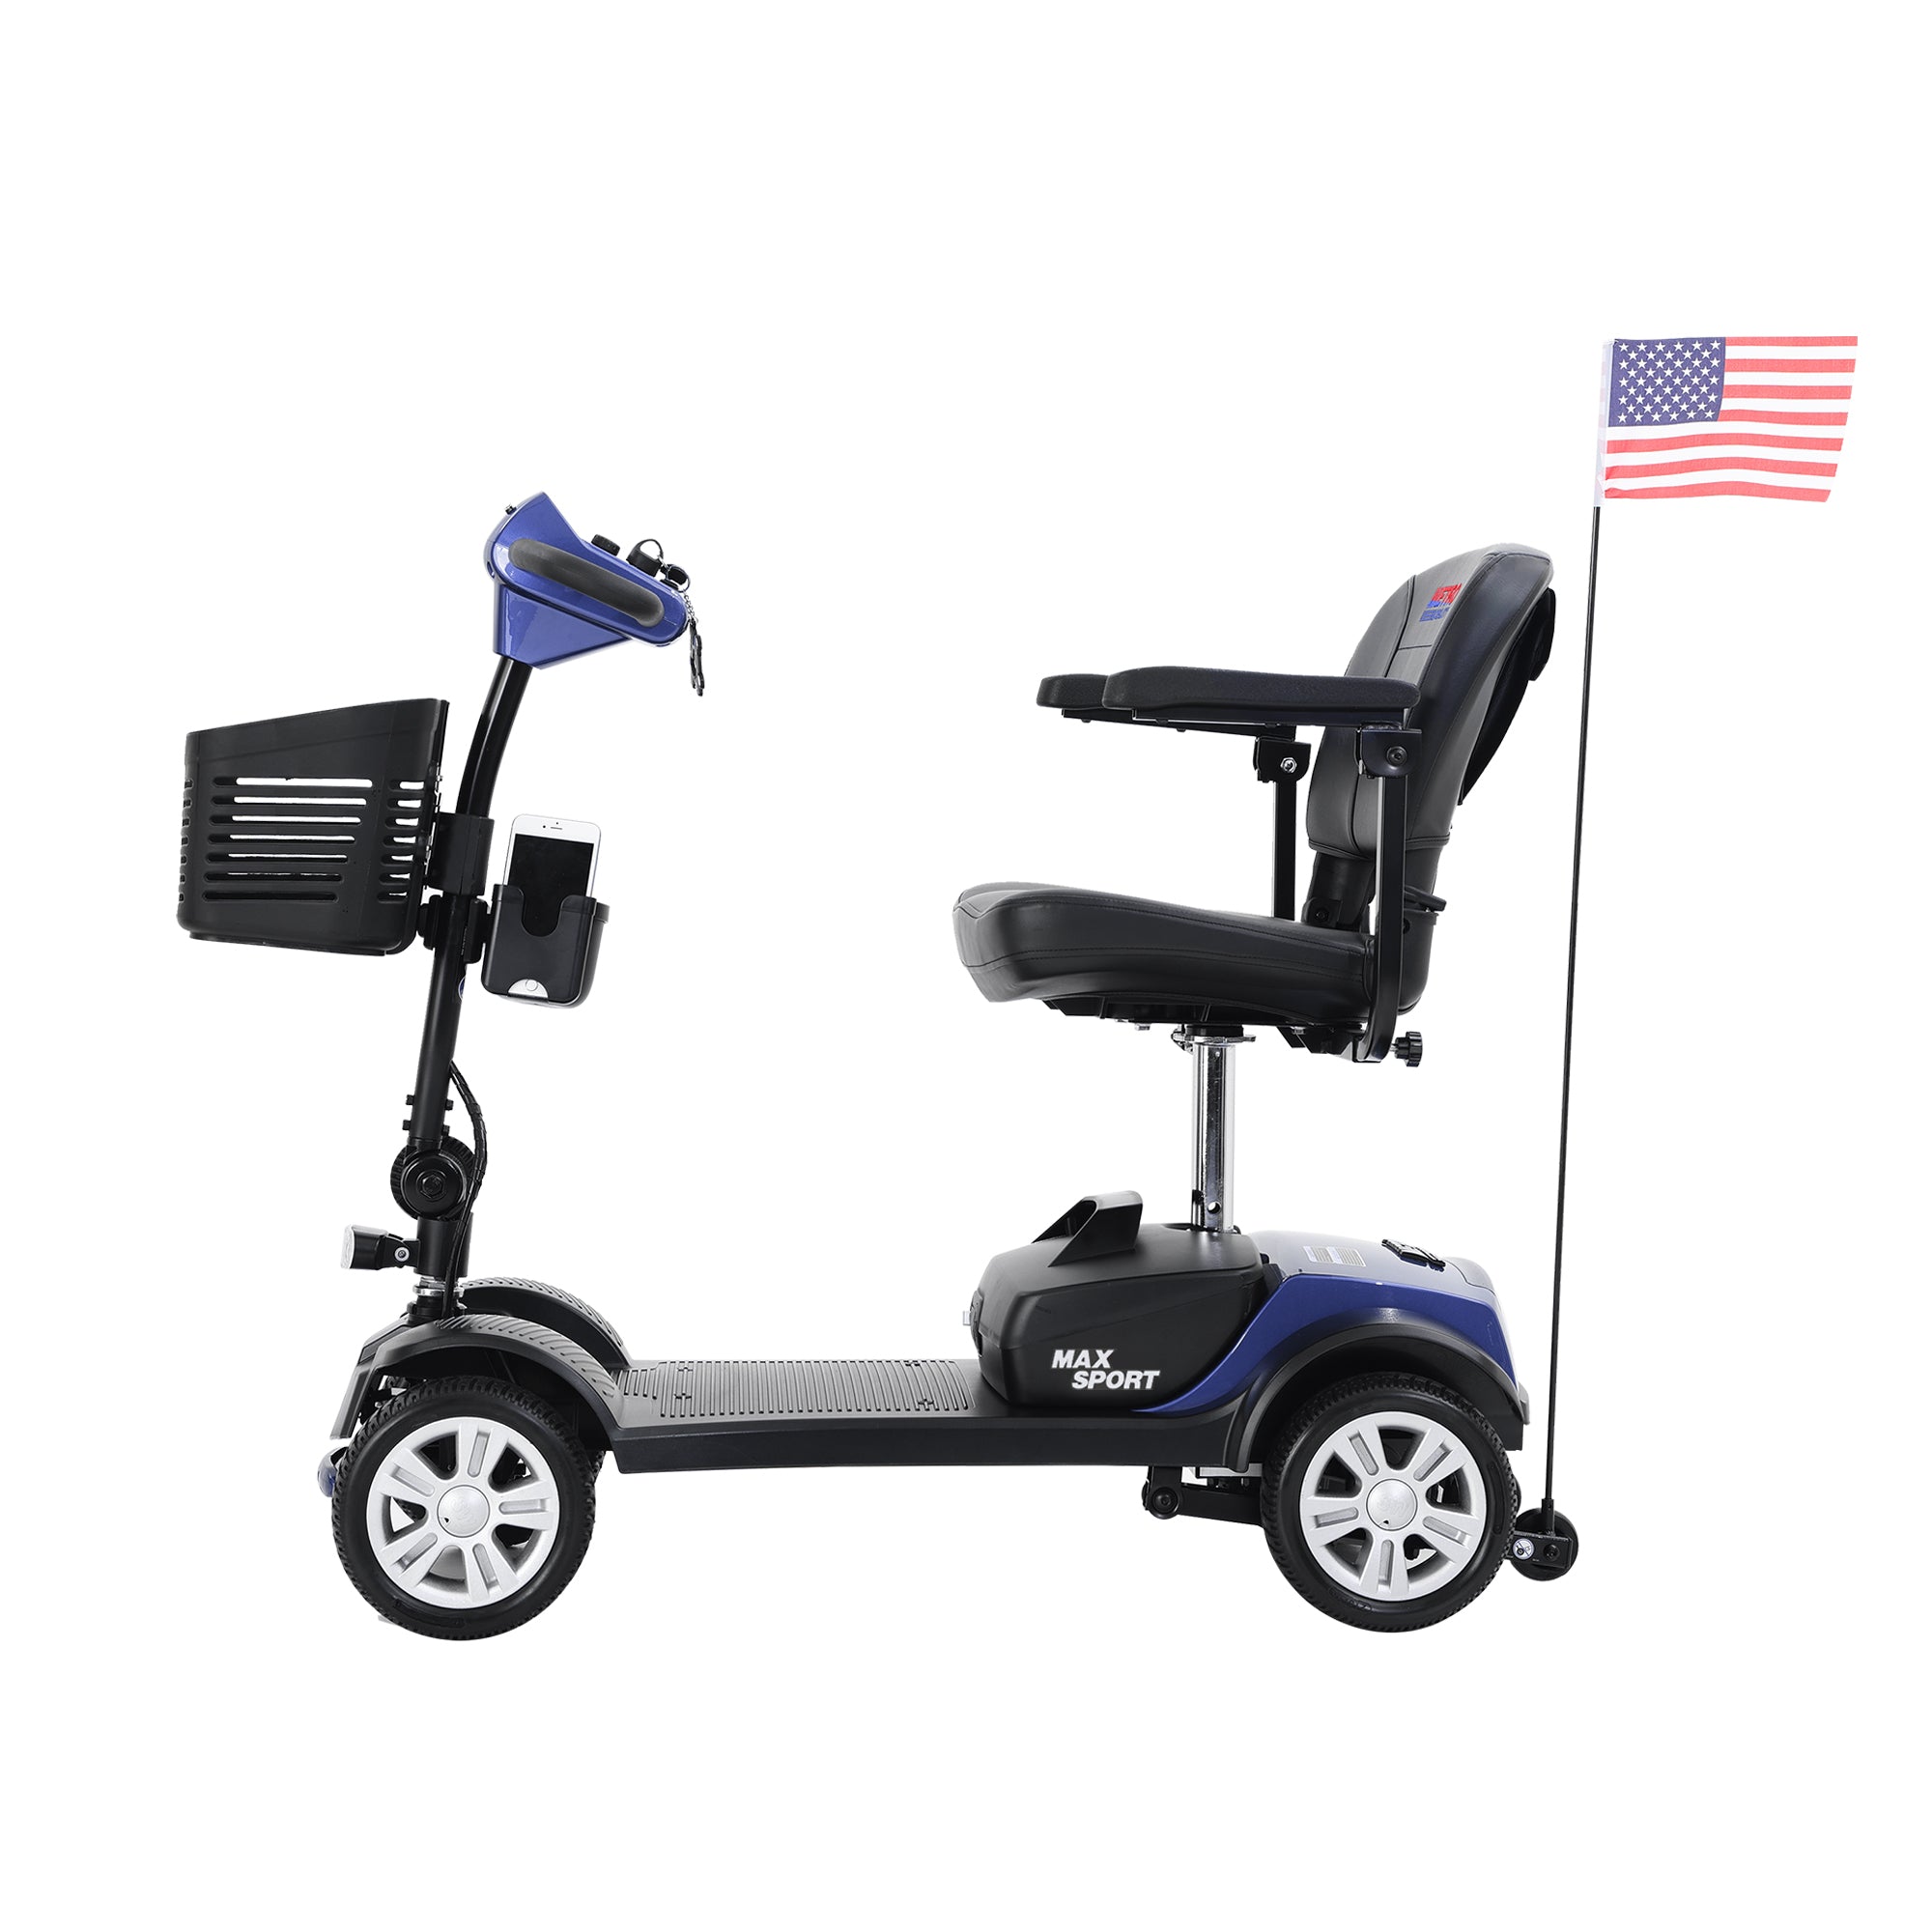 Docooler SPORT BLUE 4 Wheels Outdoor Compact Mobility Scooter with 2 in 1 Cup & Phone Holder